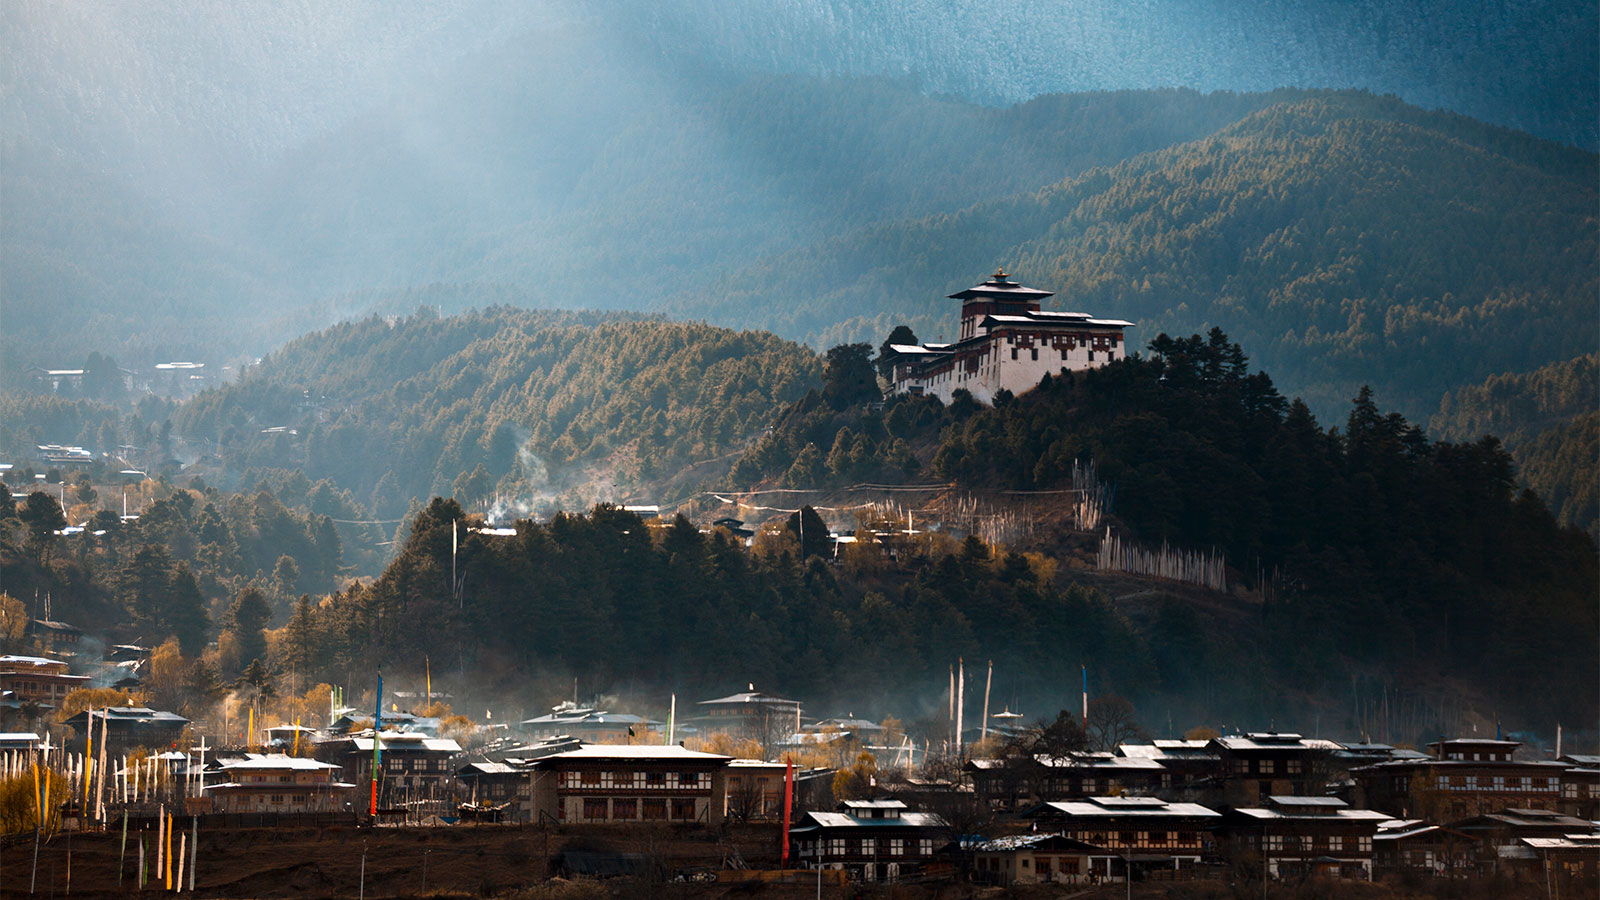 A photograph of Jakar town and Dzong in Bhutan, with rays of sunlight breaking through the morning mist.